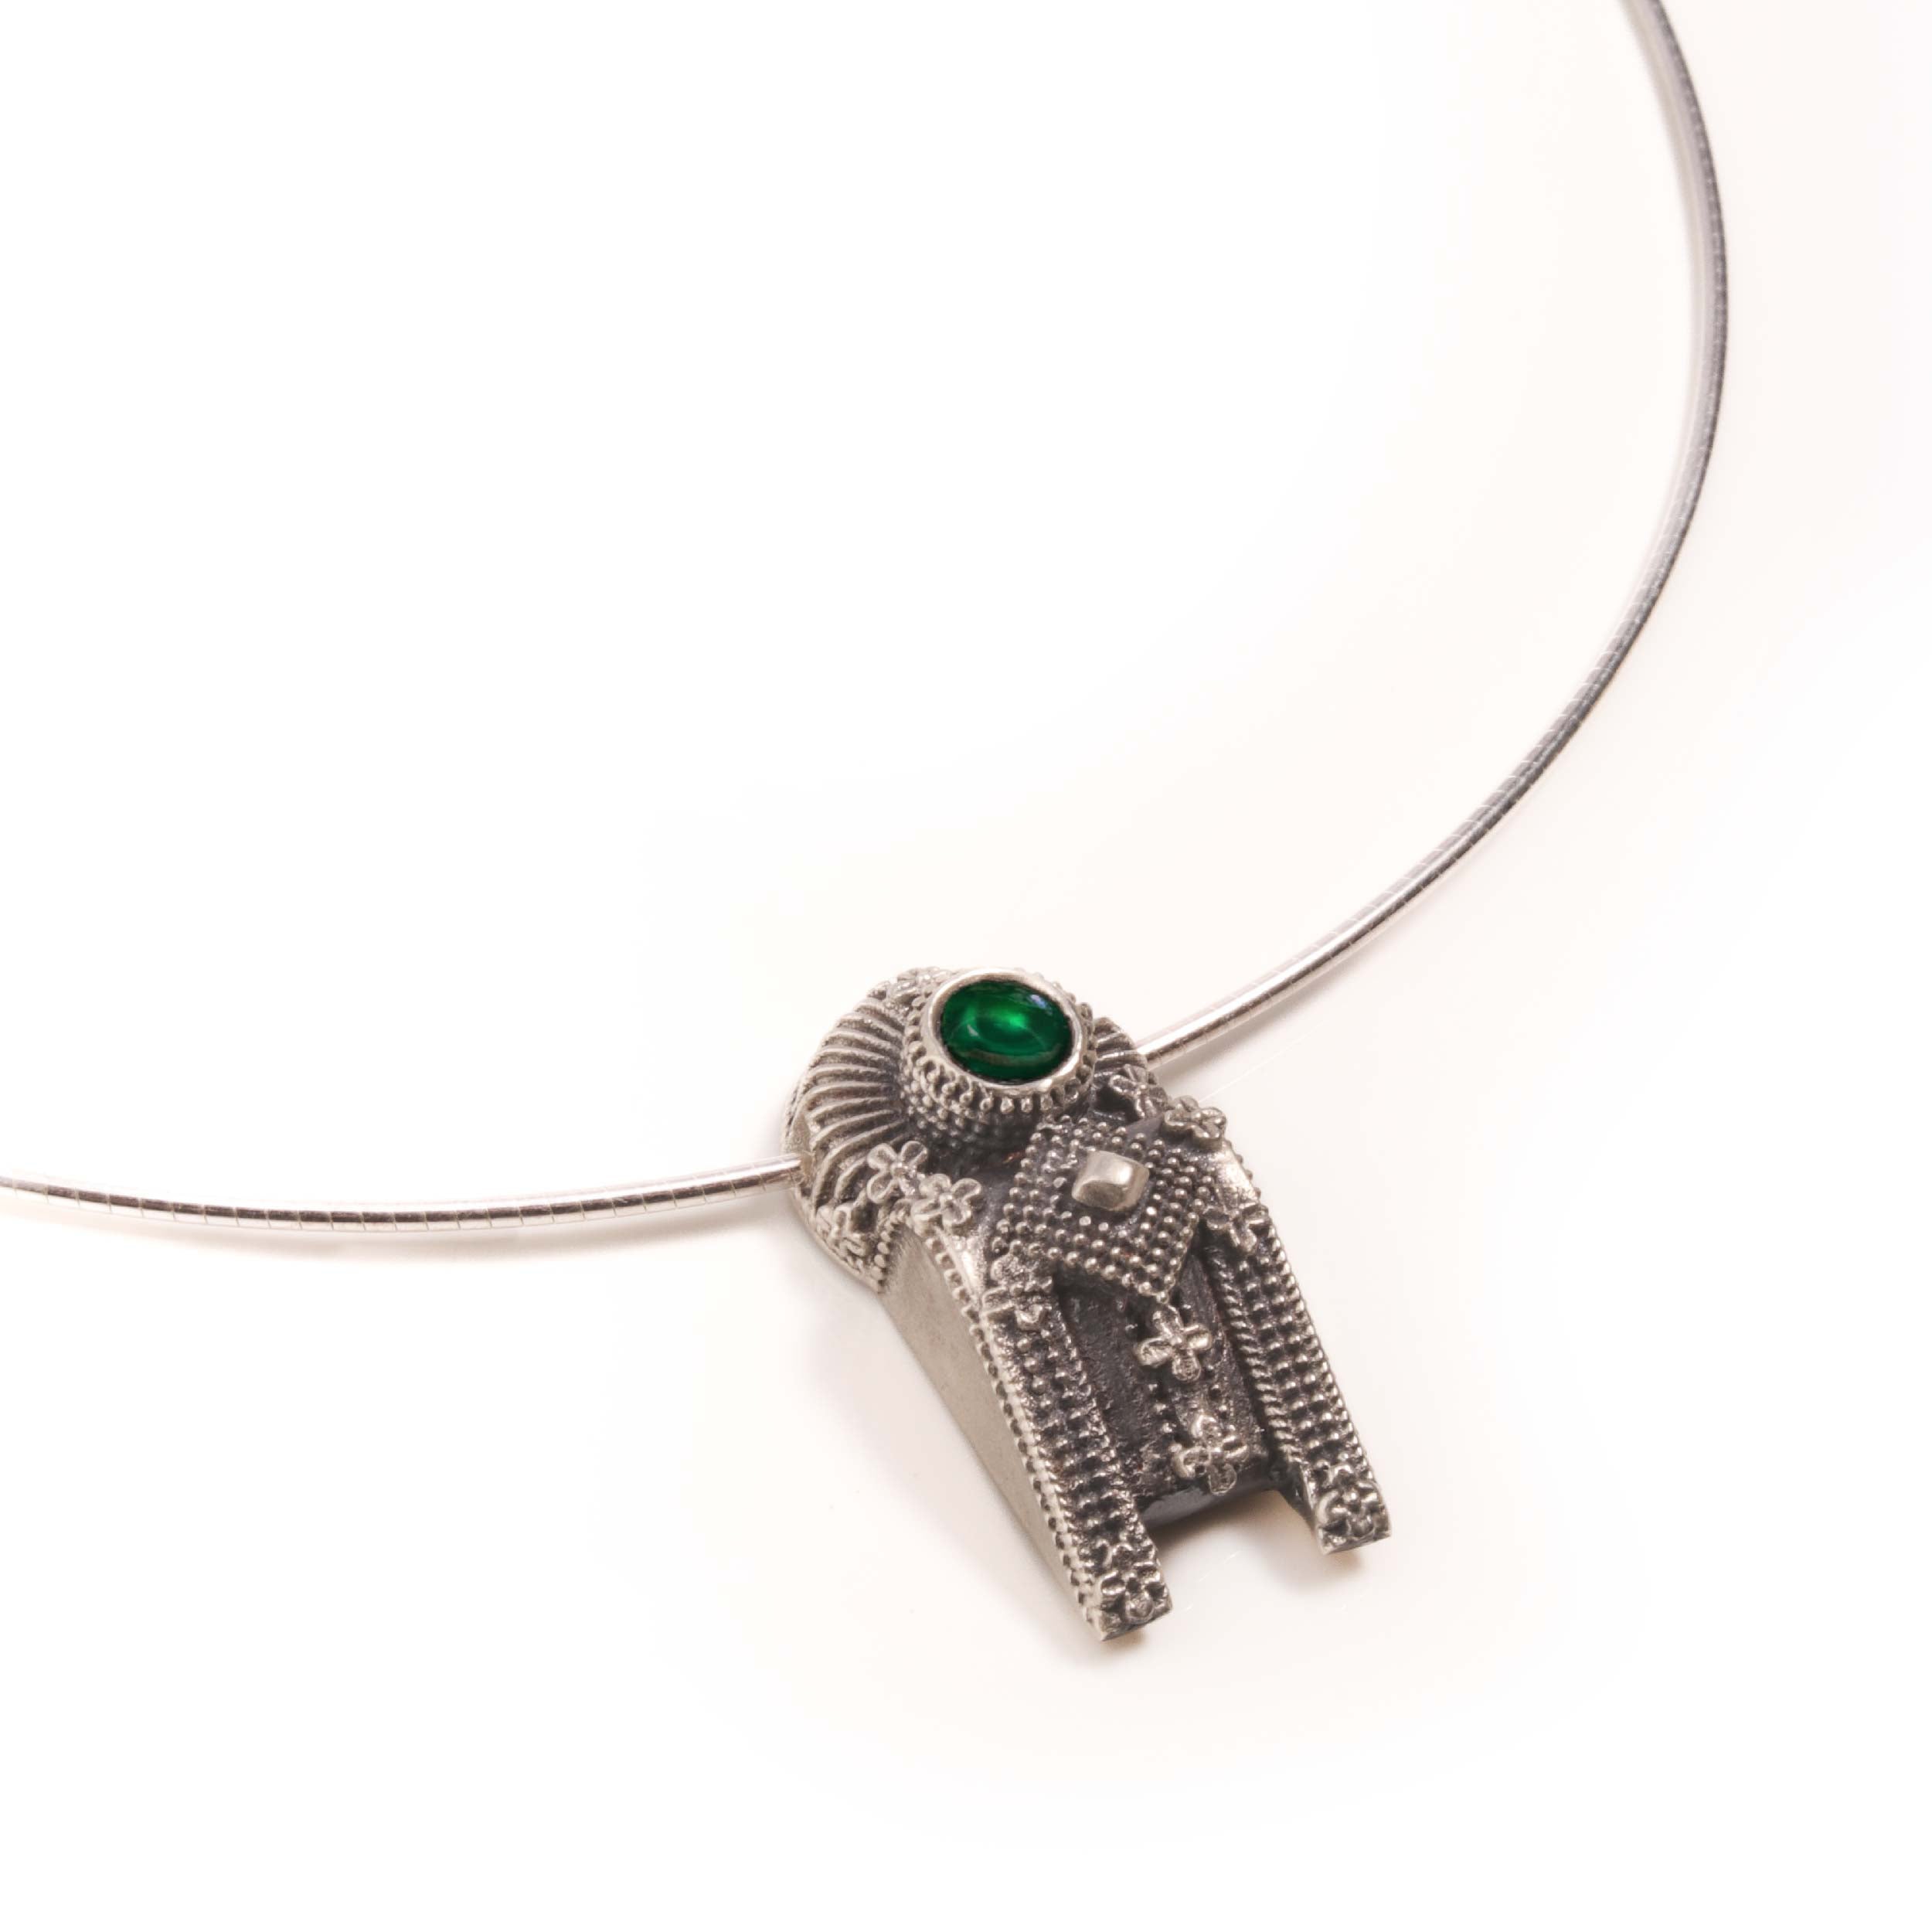 Thoppa Taali Silver Pendant Chain With Green Onyx by MOHA